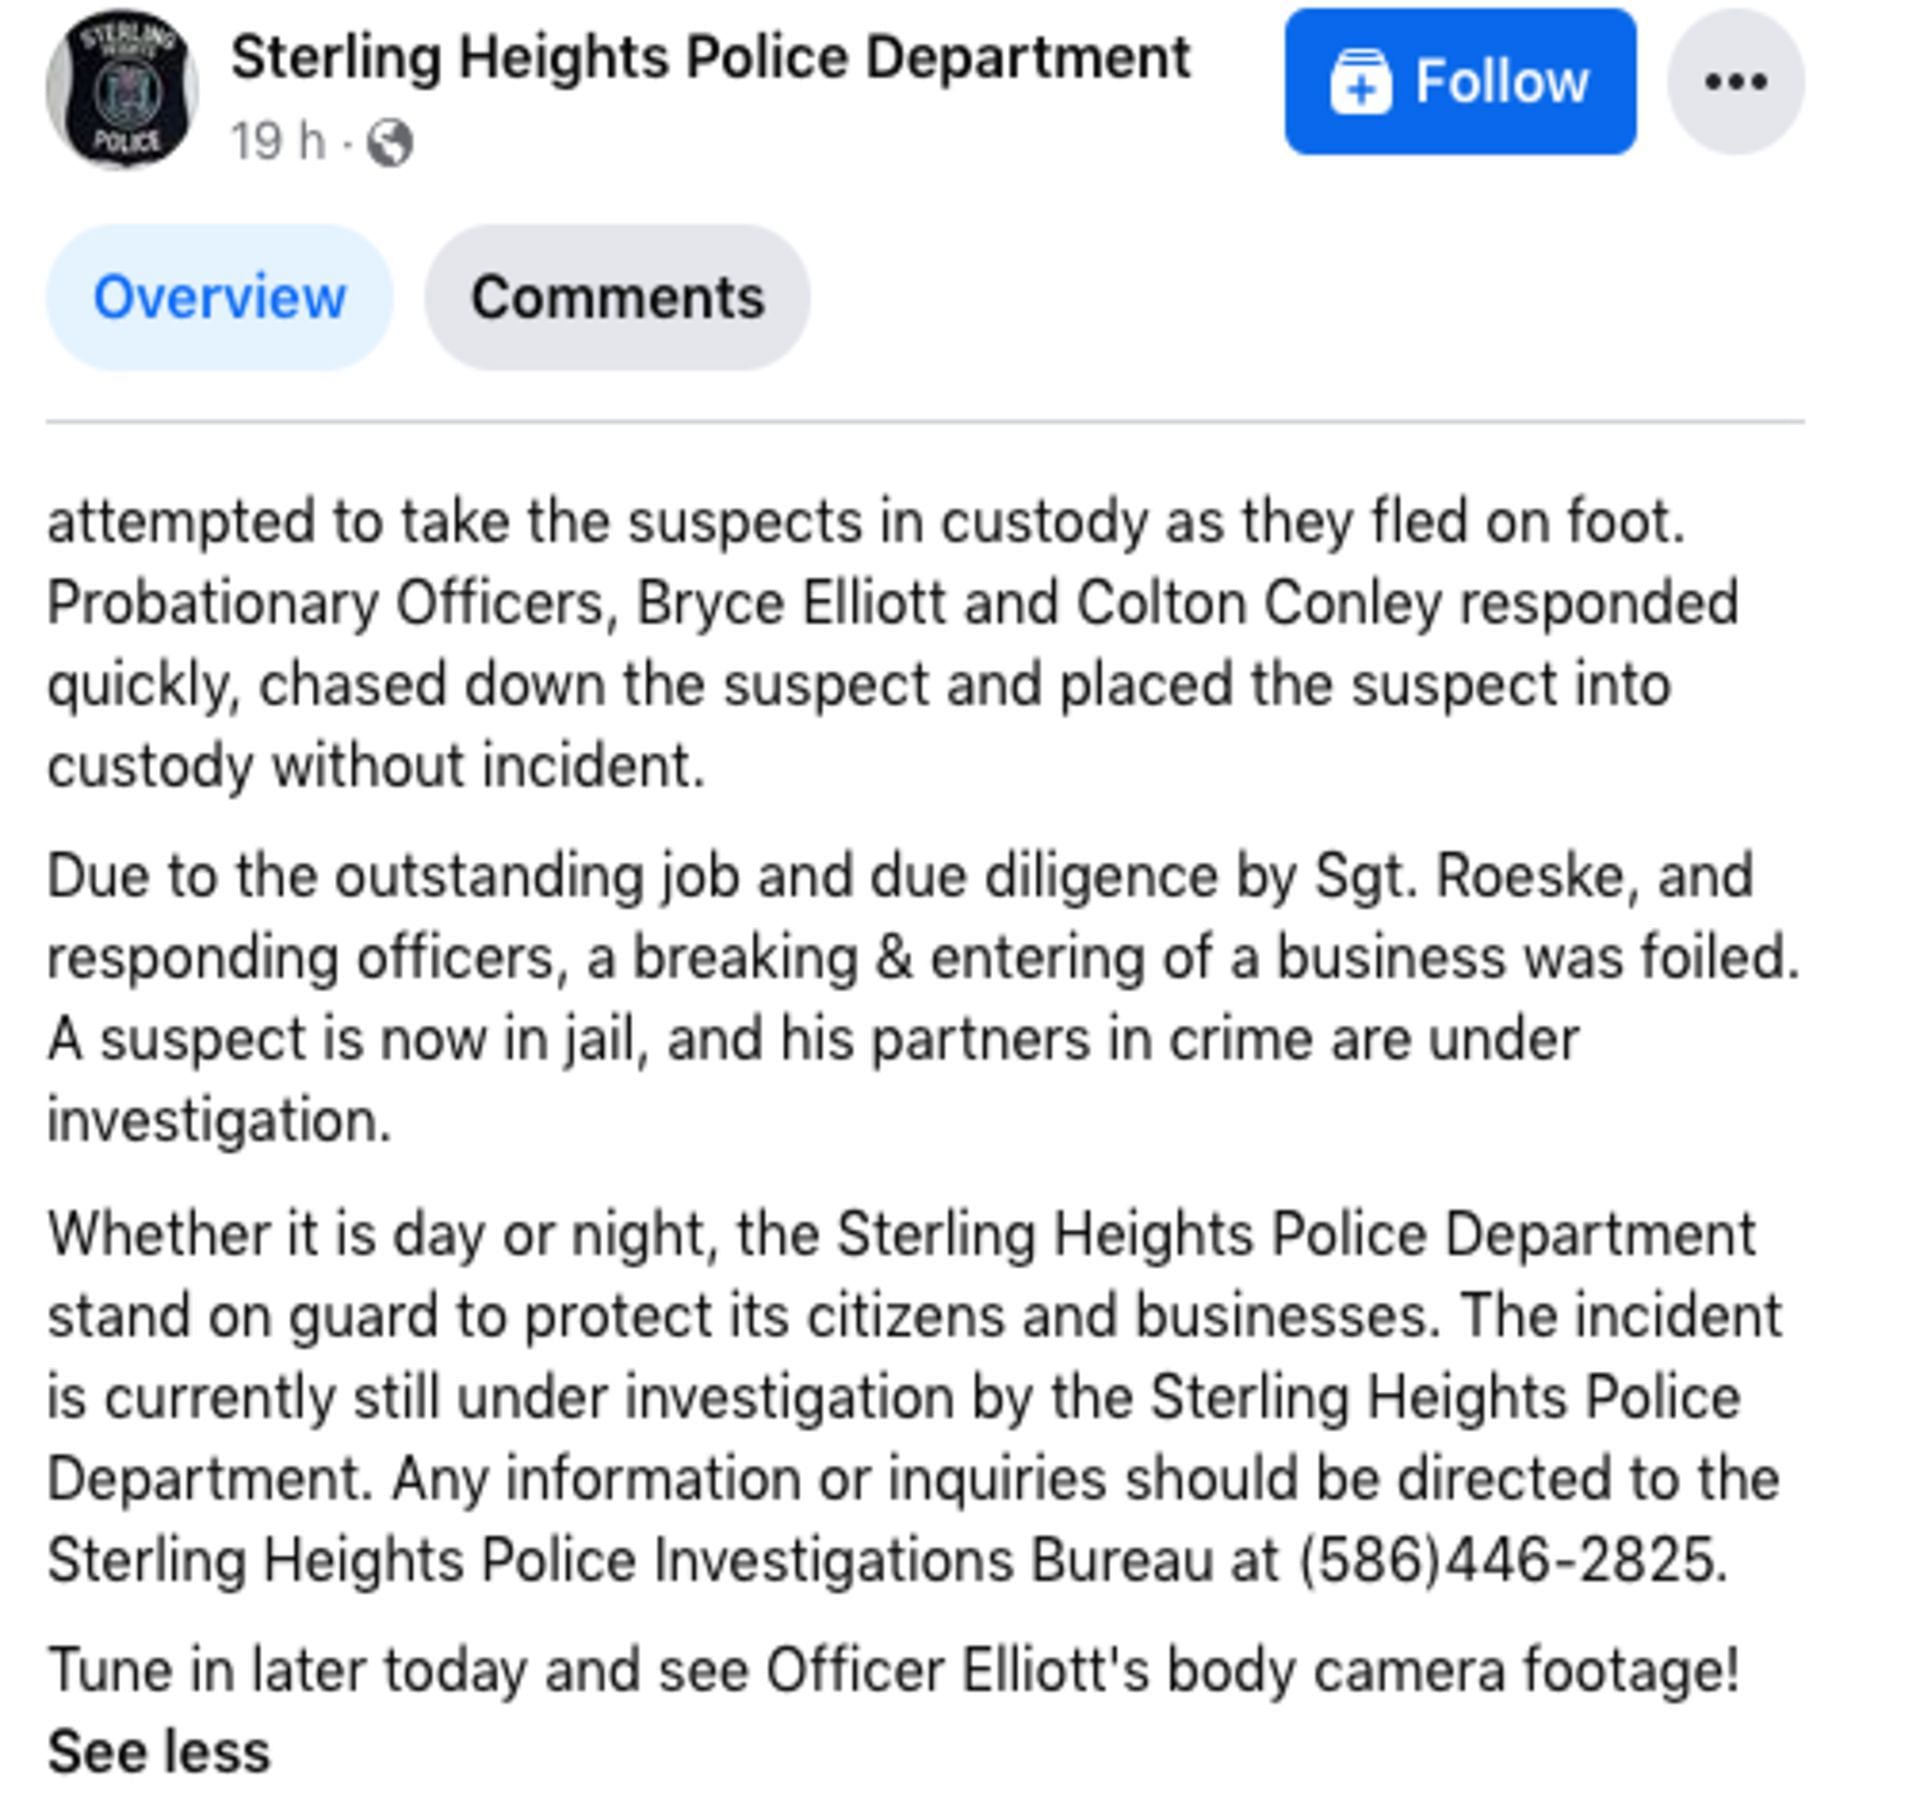 STERLING HEIGHTS POLICE DEPARTMENT/FACEBOOK